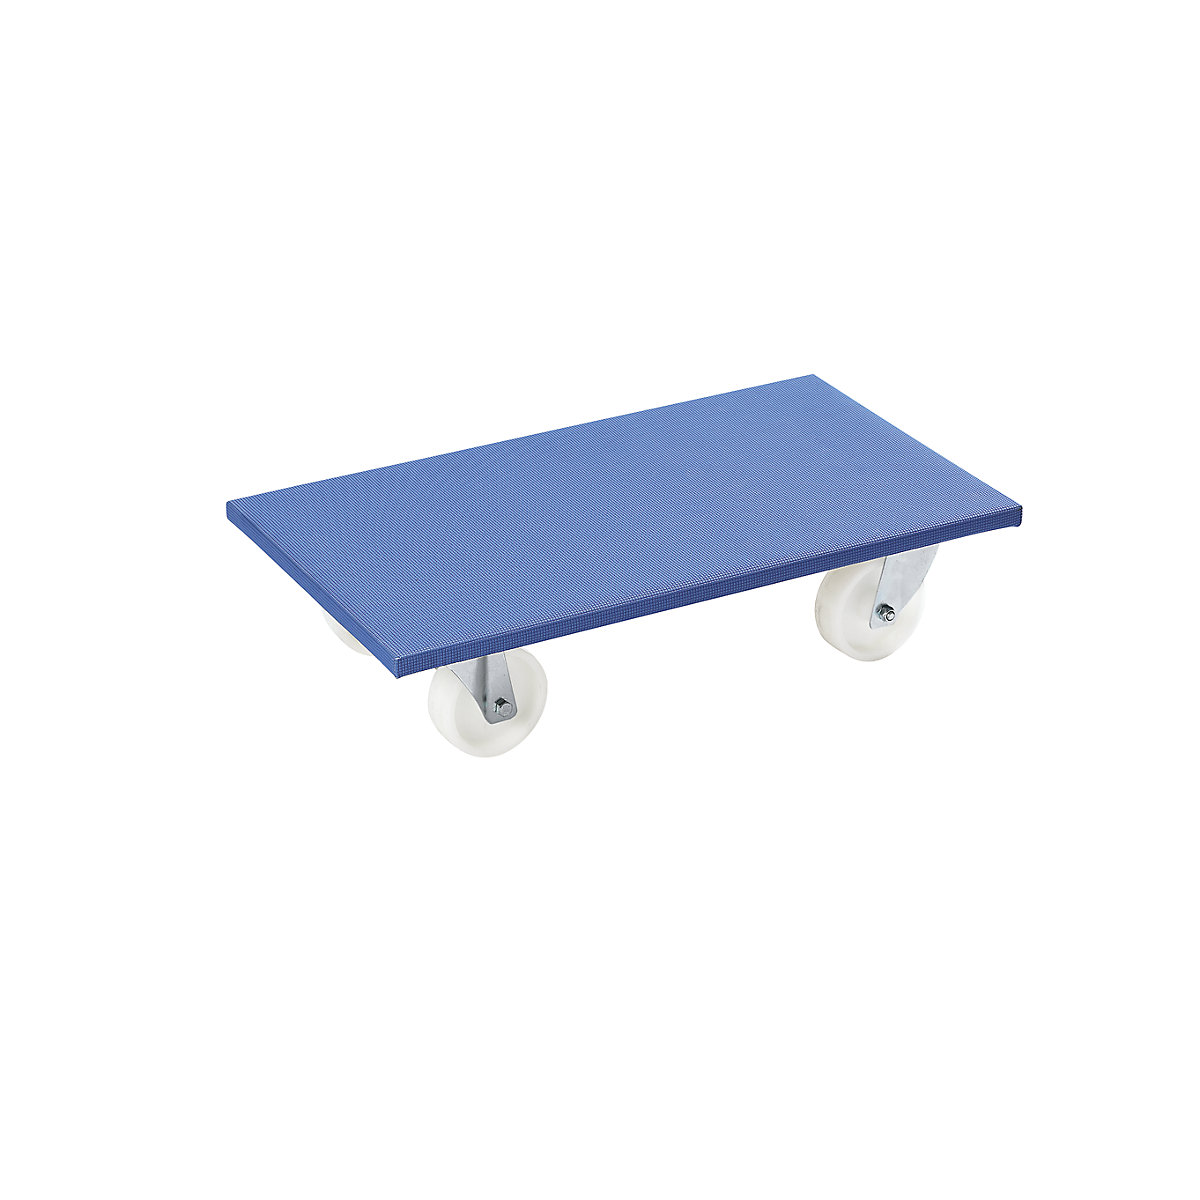 Furniture dolly, LxWxH 600 x 350 x 145 mm, pack of 2, max. load 500 kg, 2+ packs-7